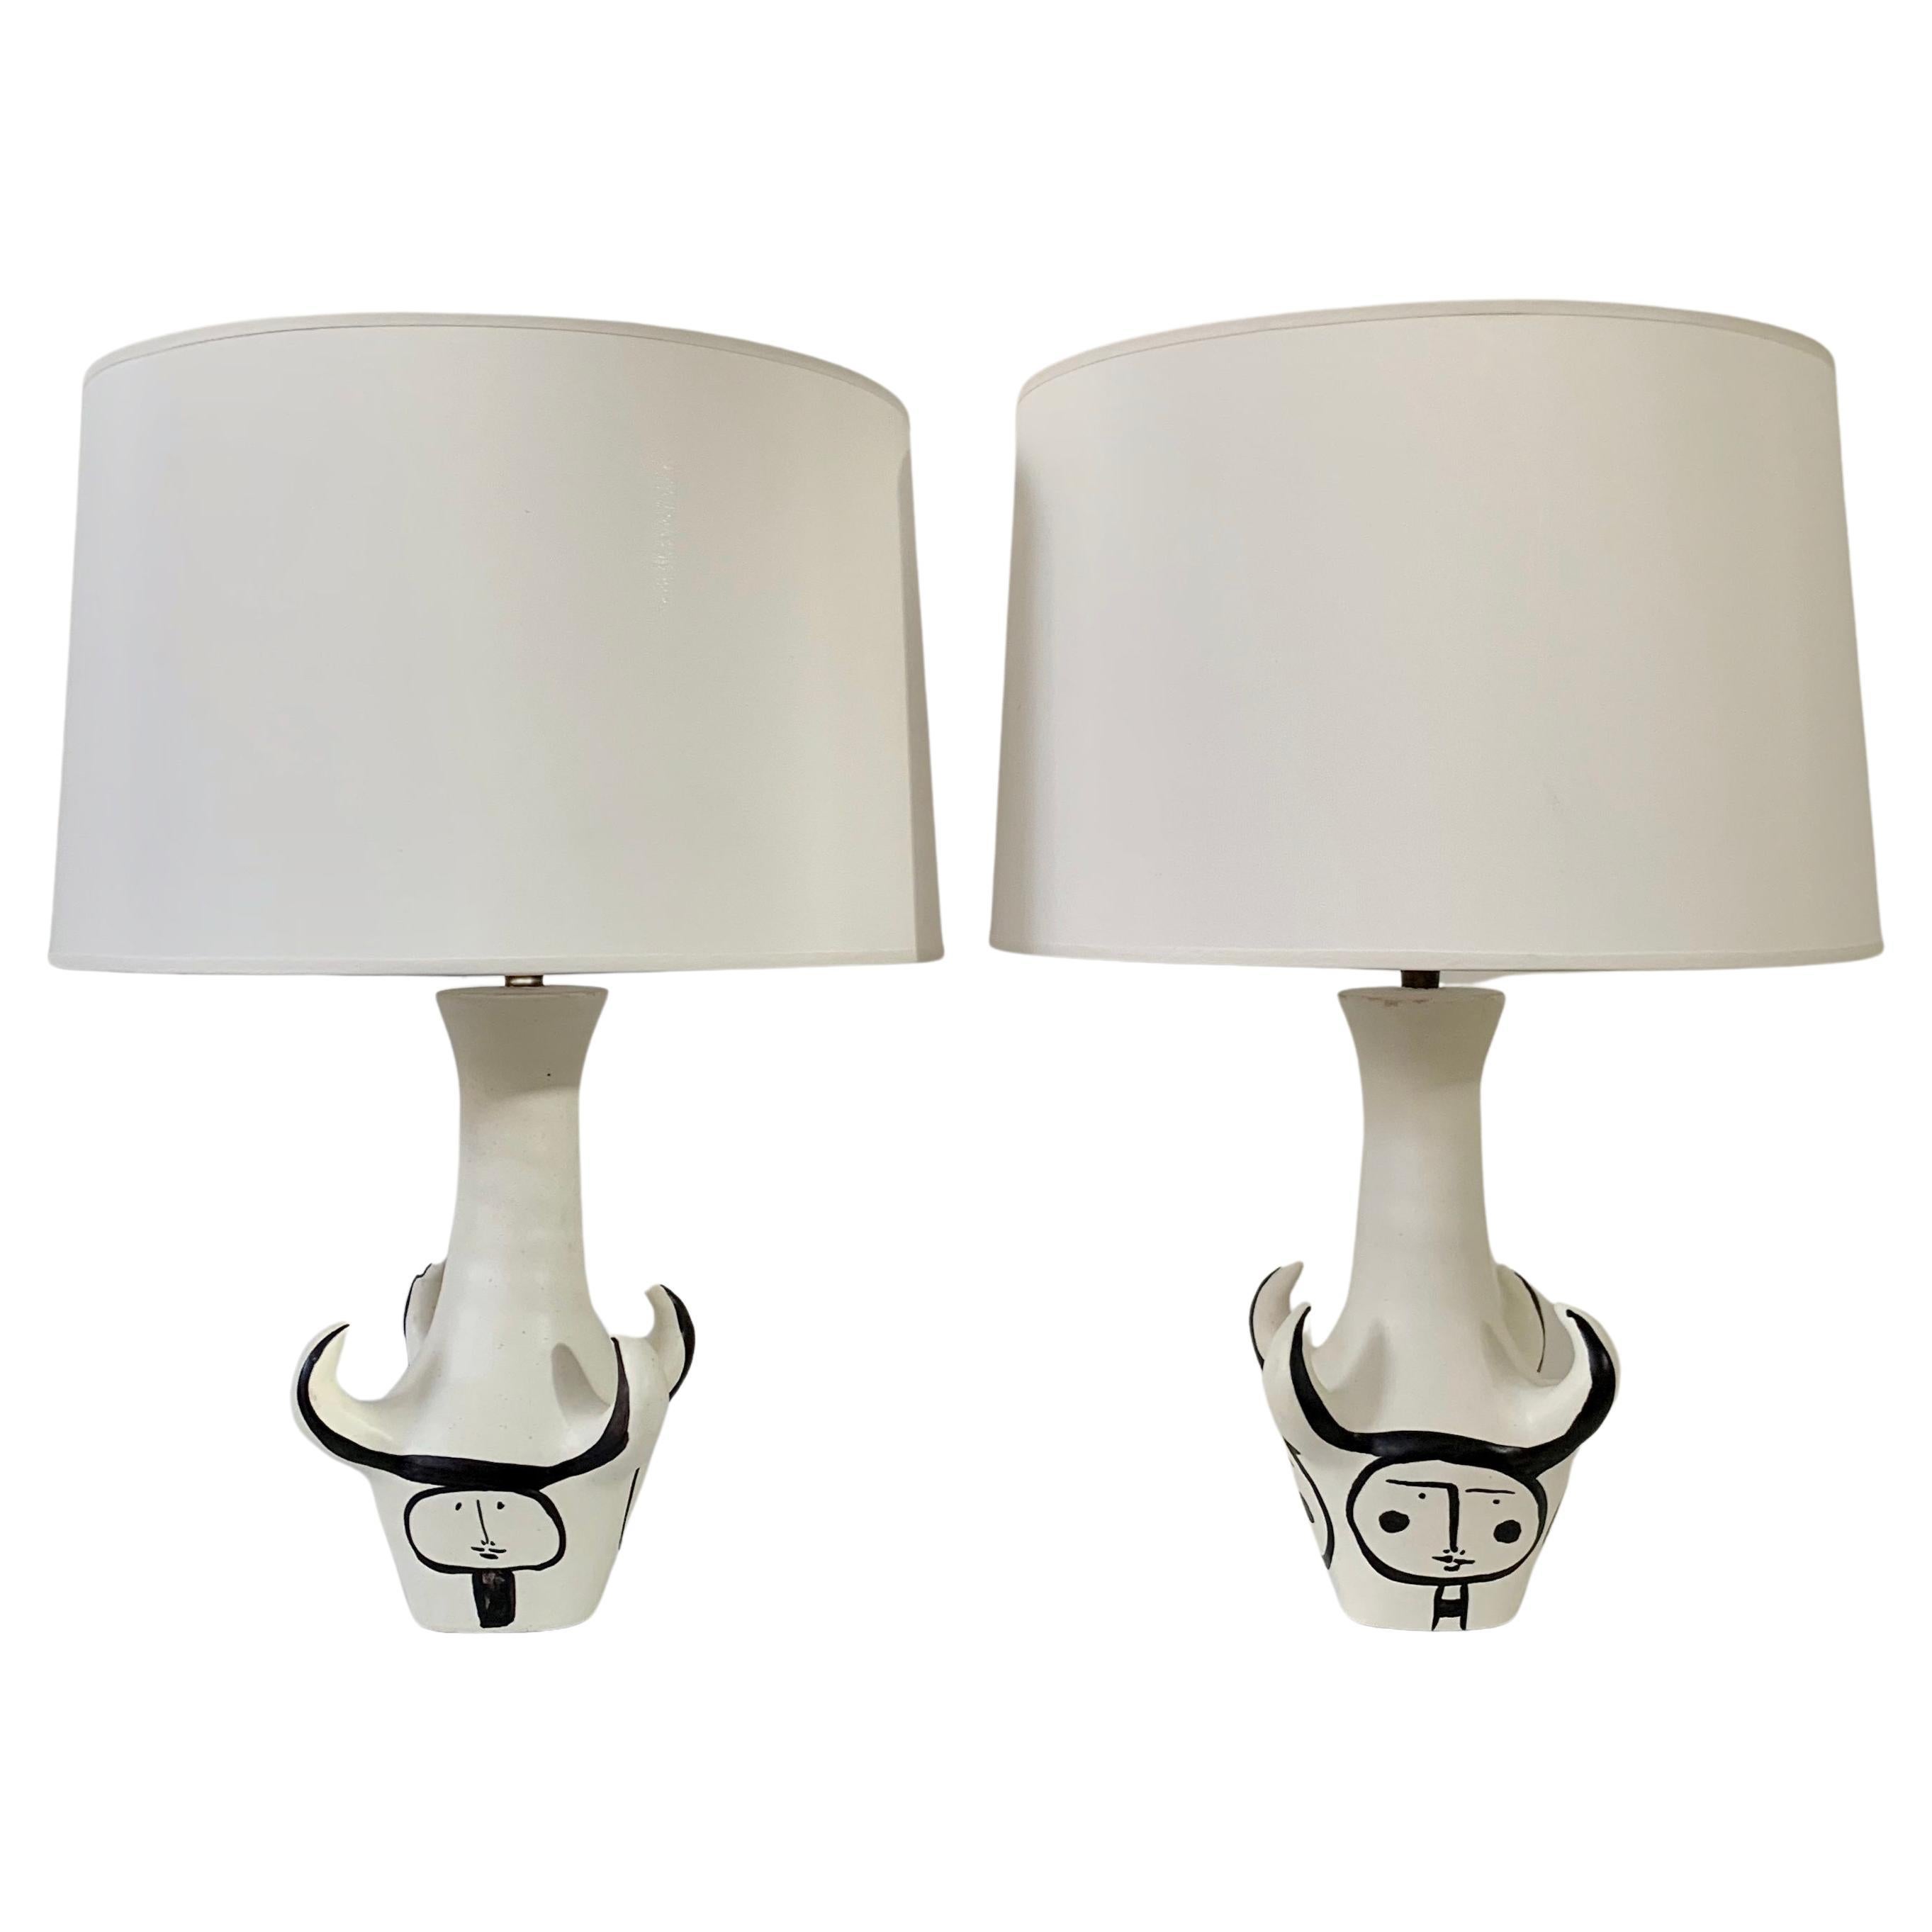  Roger Capron Pair Of 4 Horns Signed Ceramic Table Lamps , circa 1955, France. For Sale